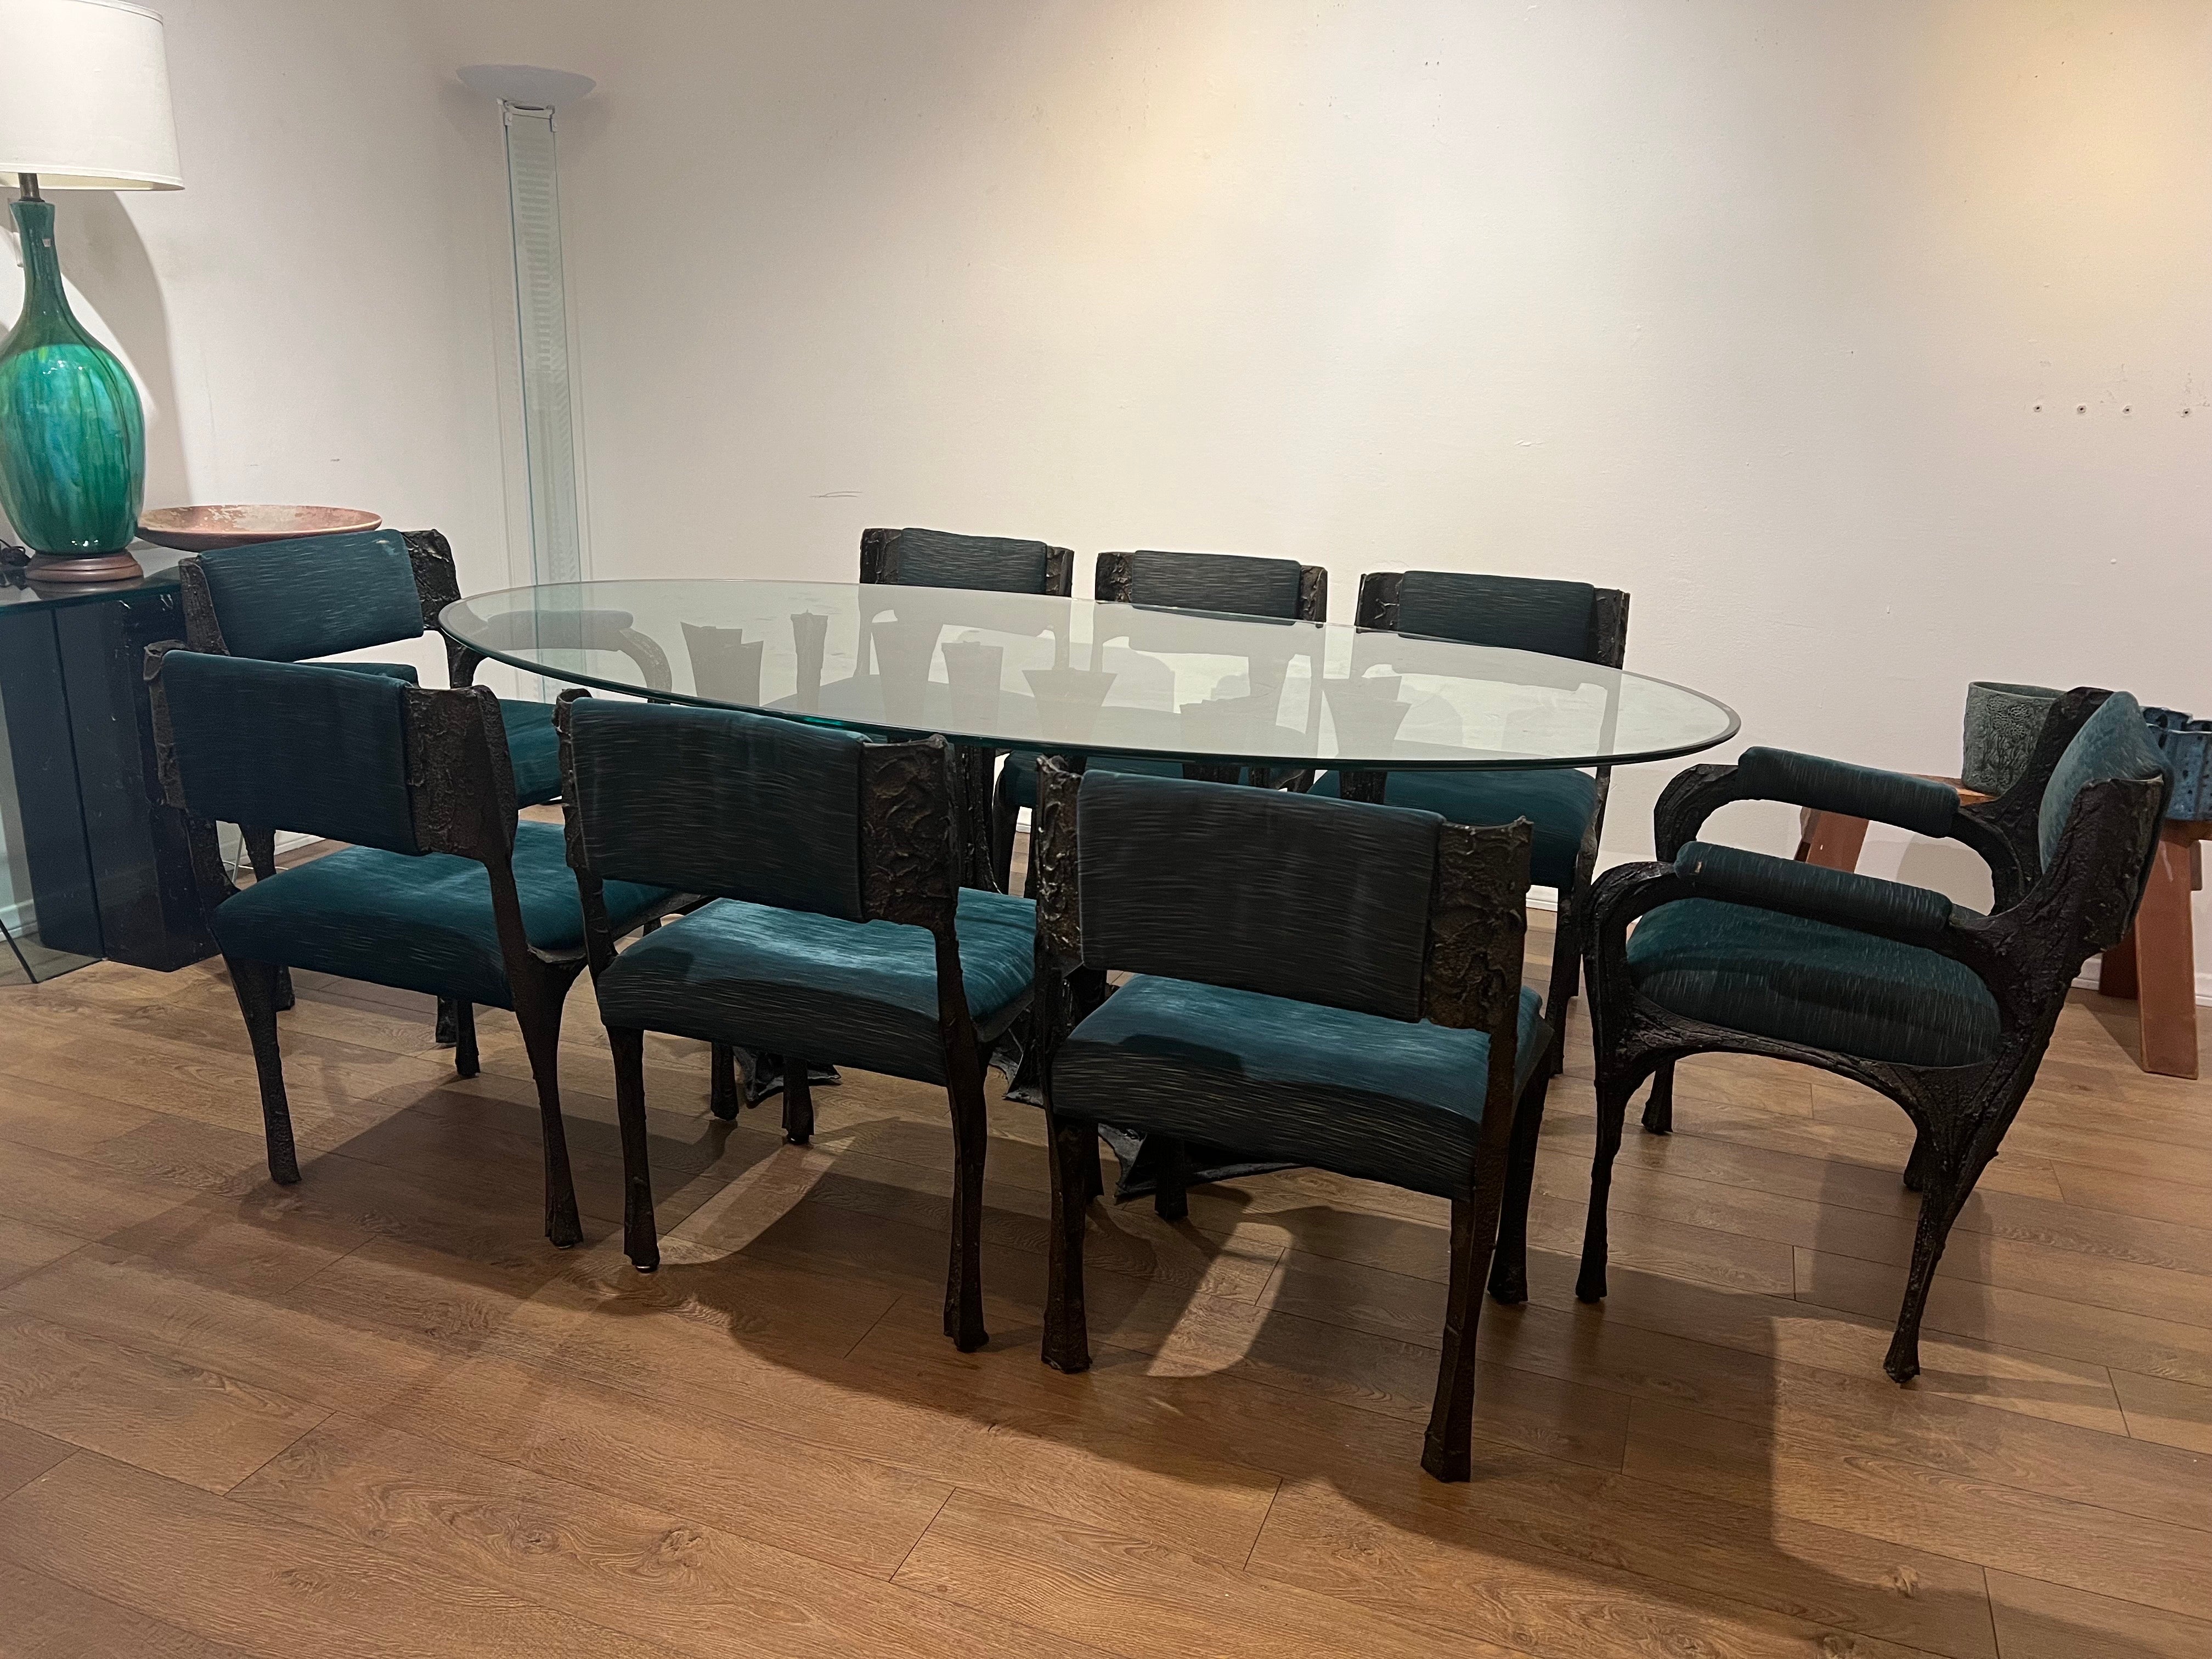 
Elevate your dining experience with this extraordinary set crafted by the legendary Paul Evans Studio in 1969. Comprising a rare ensemble of eight chairs and a dining table, this collection exemplifies the pinnacle of Brutalist design, showcasing